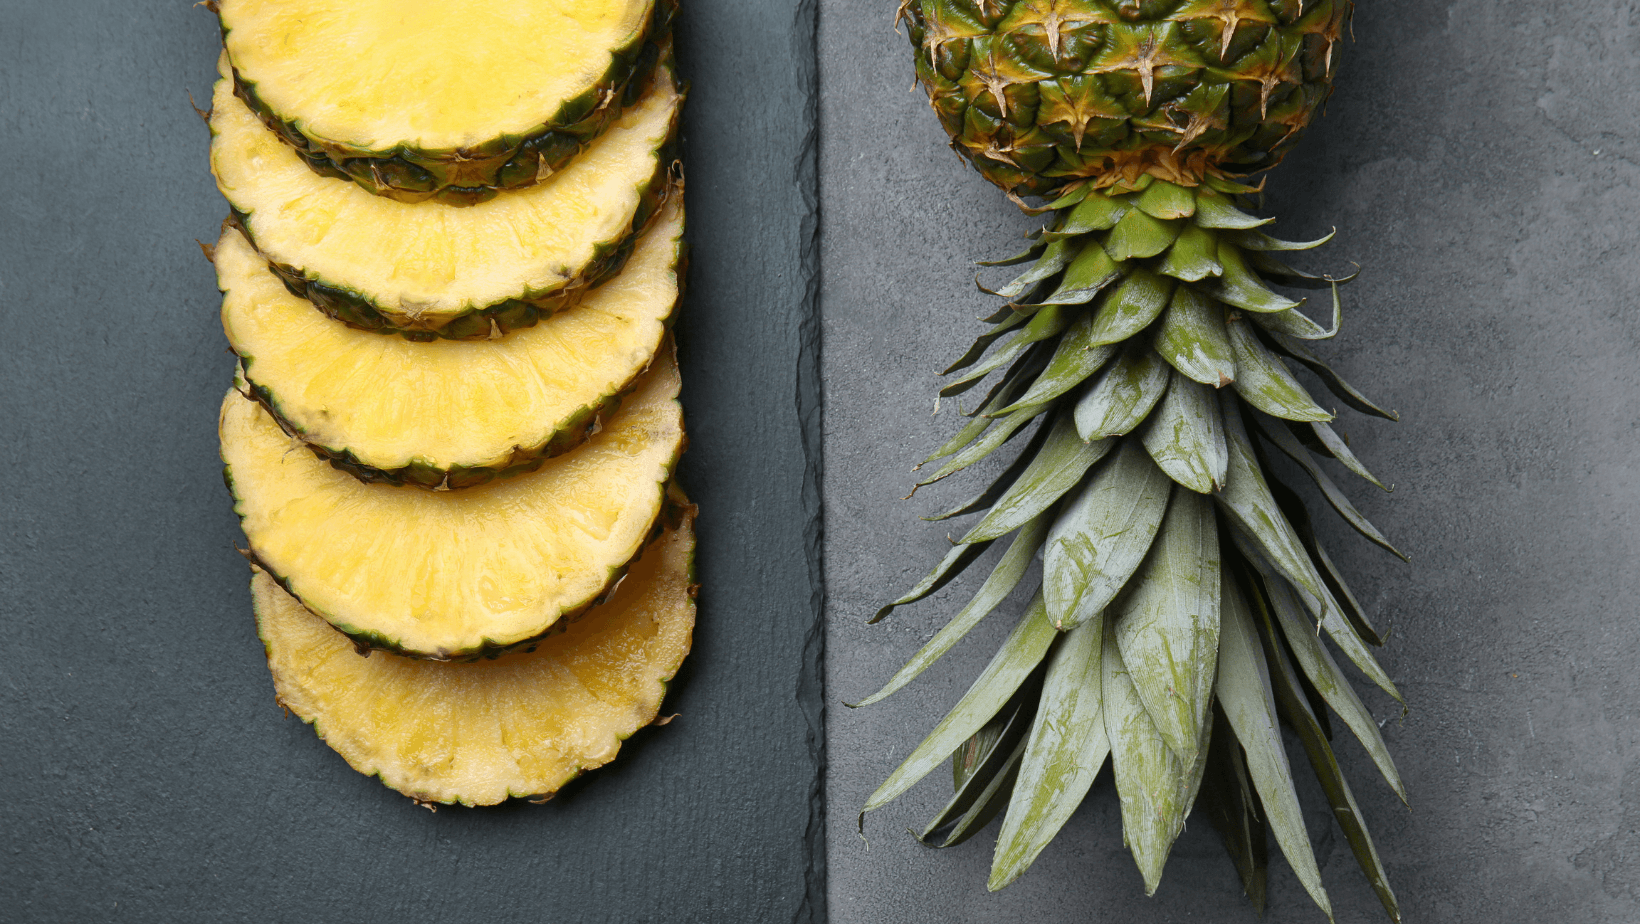 Bromelain: Dosage, Benefits, and Side Effects - Betta Health And Wellness